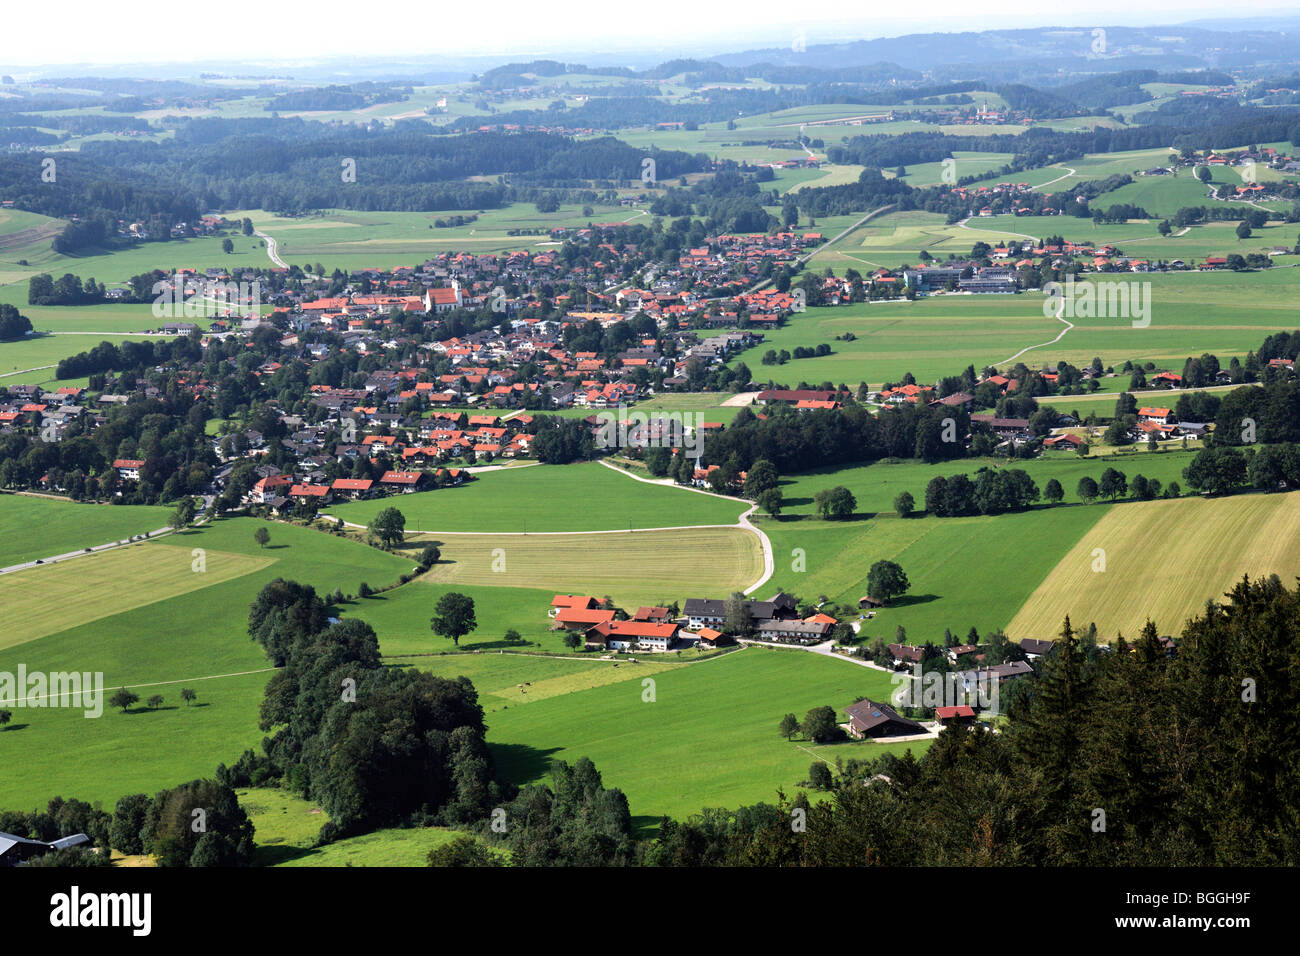 Aerial view to the town of Aschau Upper Bavaria Germany Stock Photo